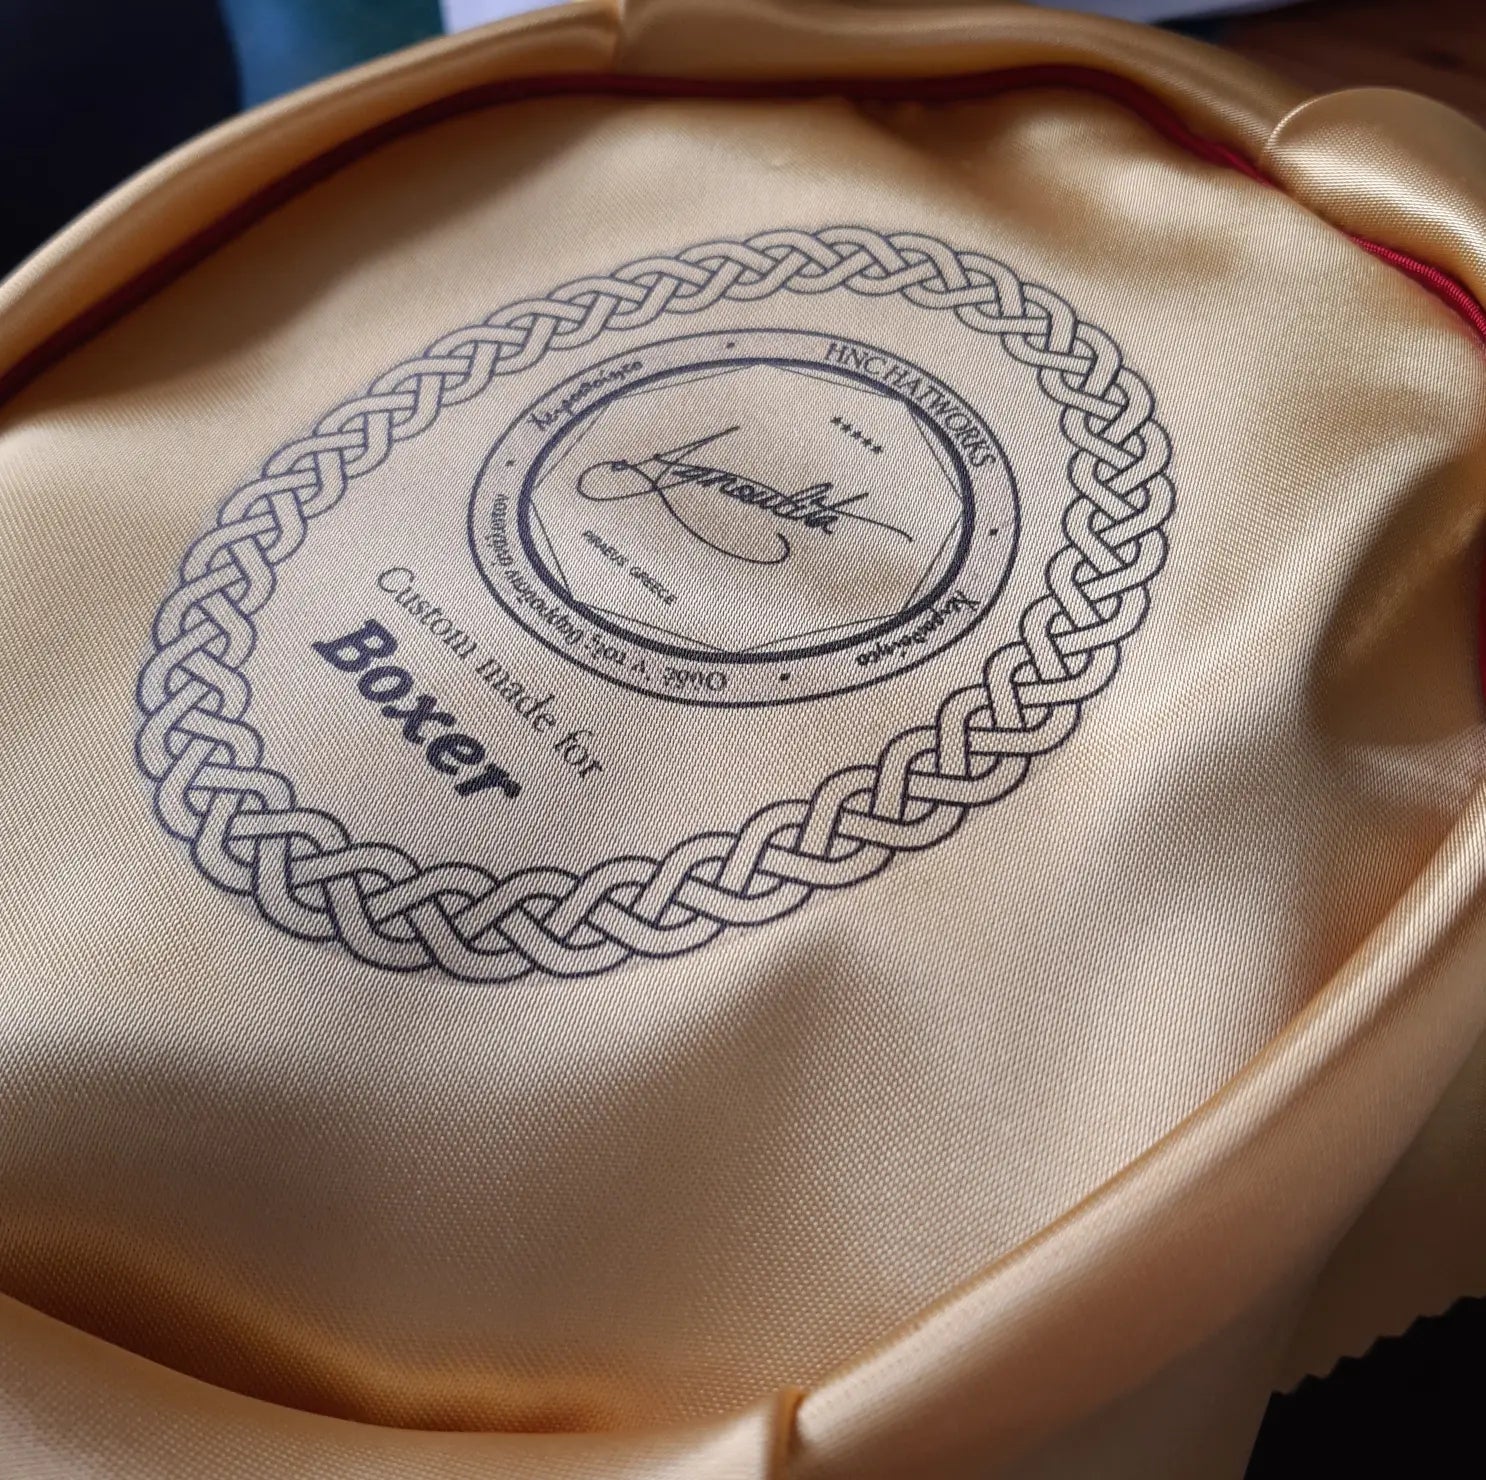 Inside view of a hat showing the brand label 'Agnoulita' with a signature, stating 'Custom-made for Boxer'